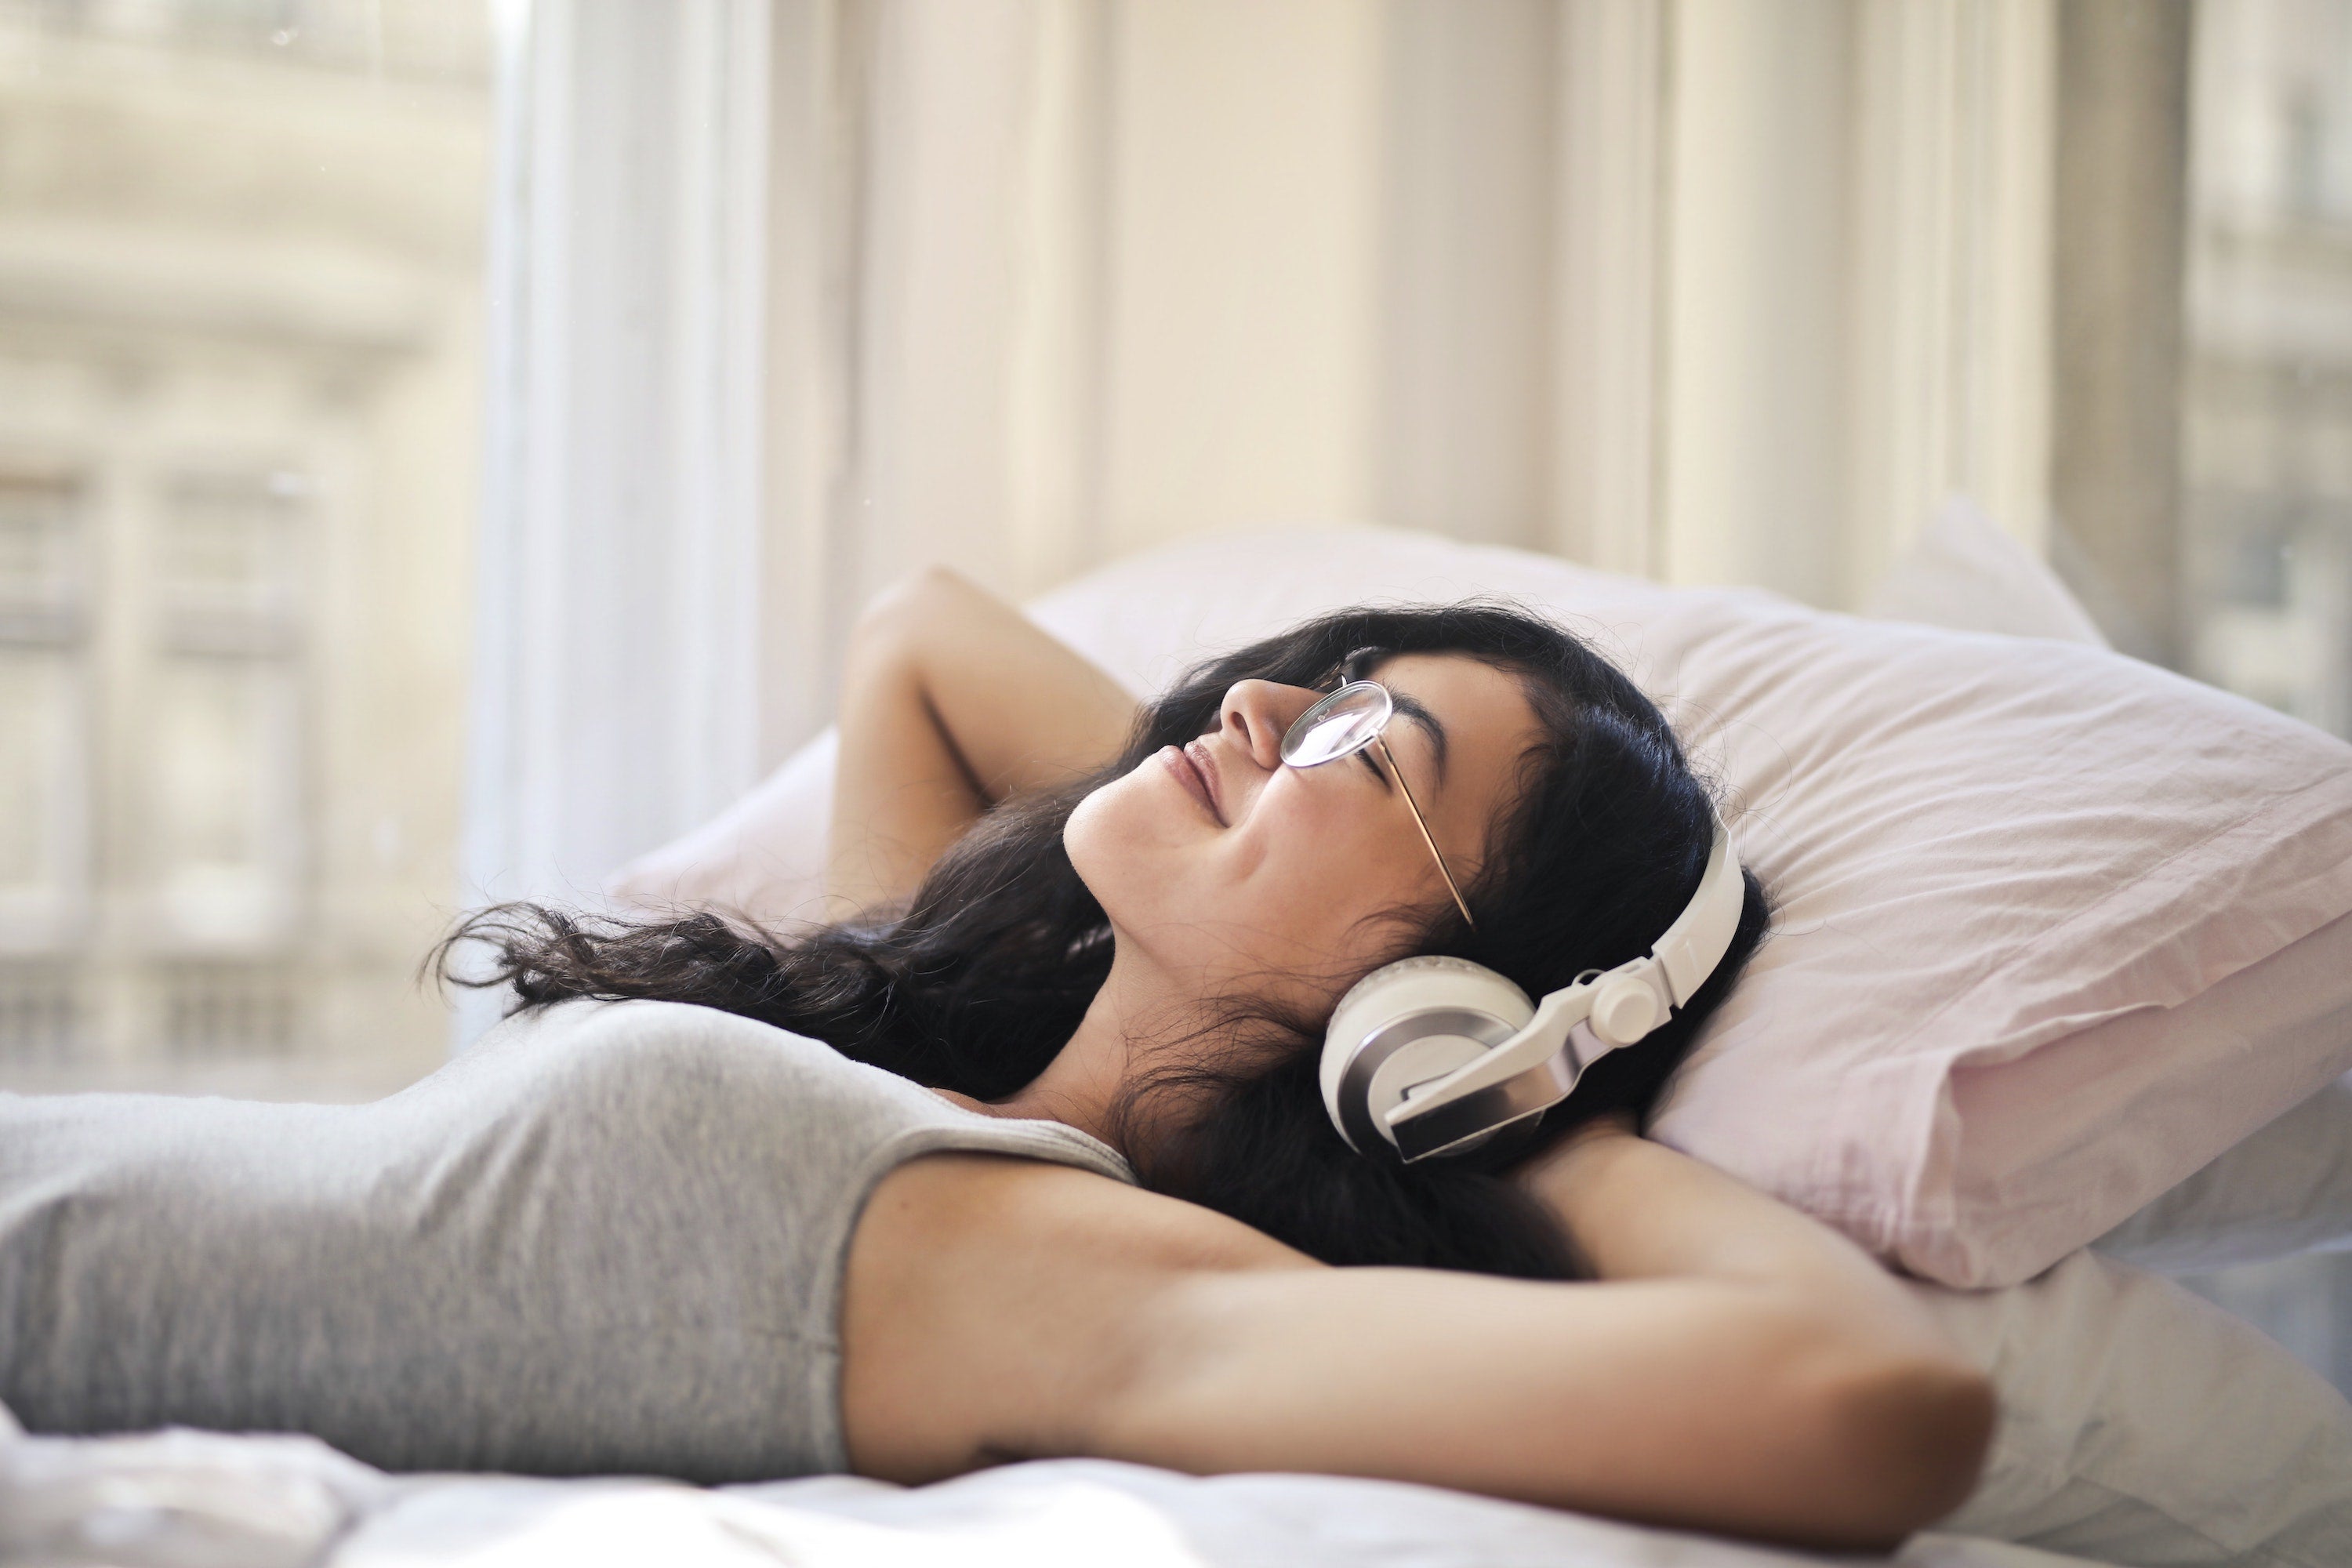 10 Songs to Add to Your Sleep Playlist